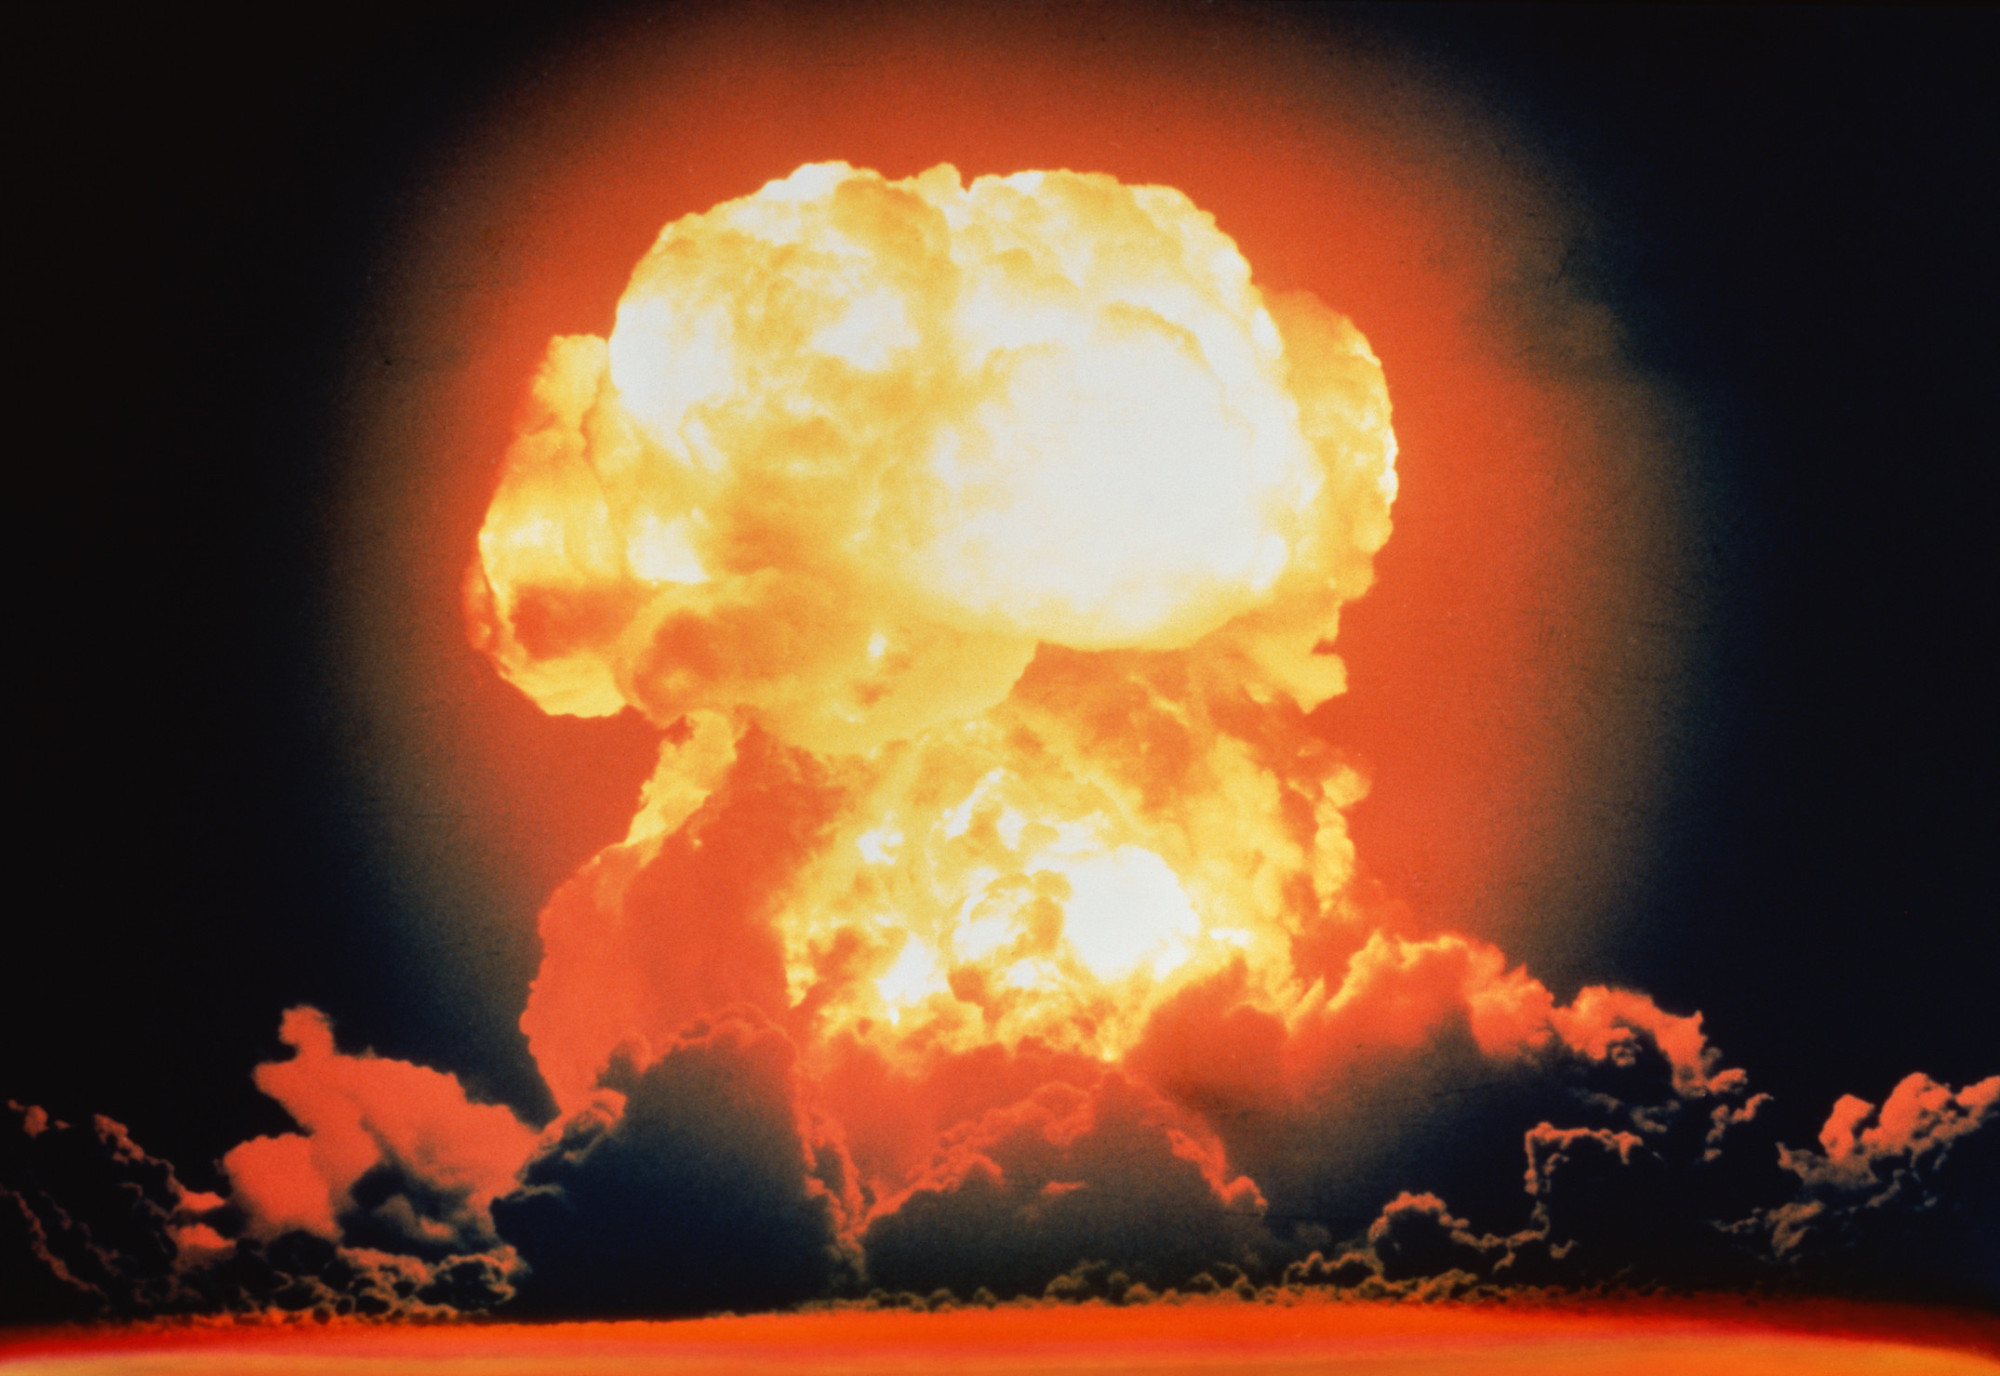 Yes, you CAN survive a nuclear blast, and here’s how to do it